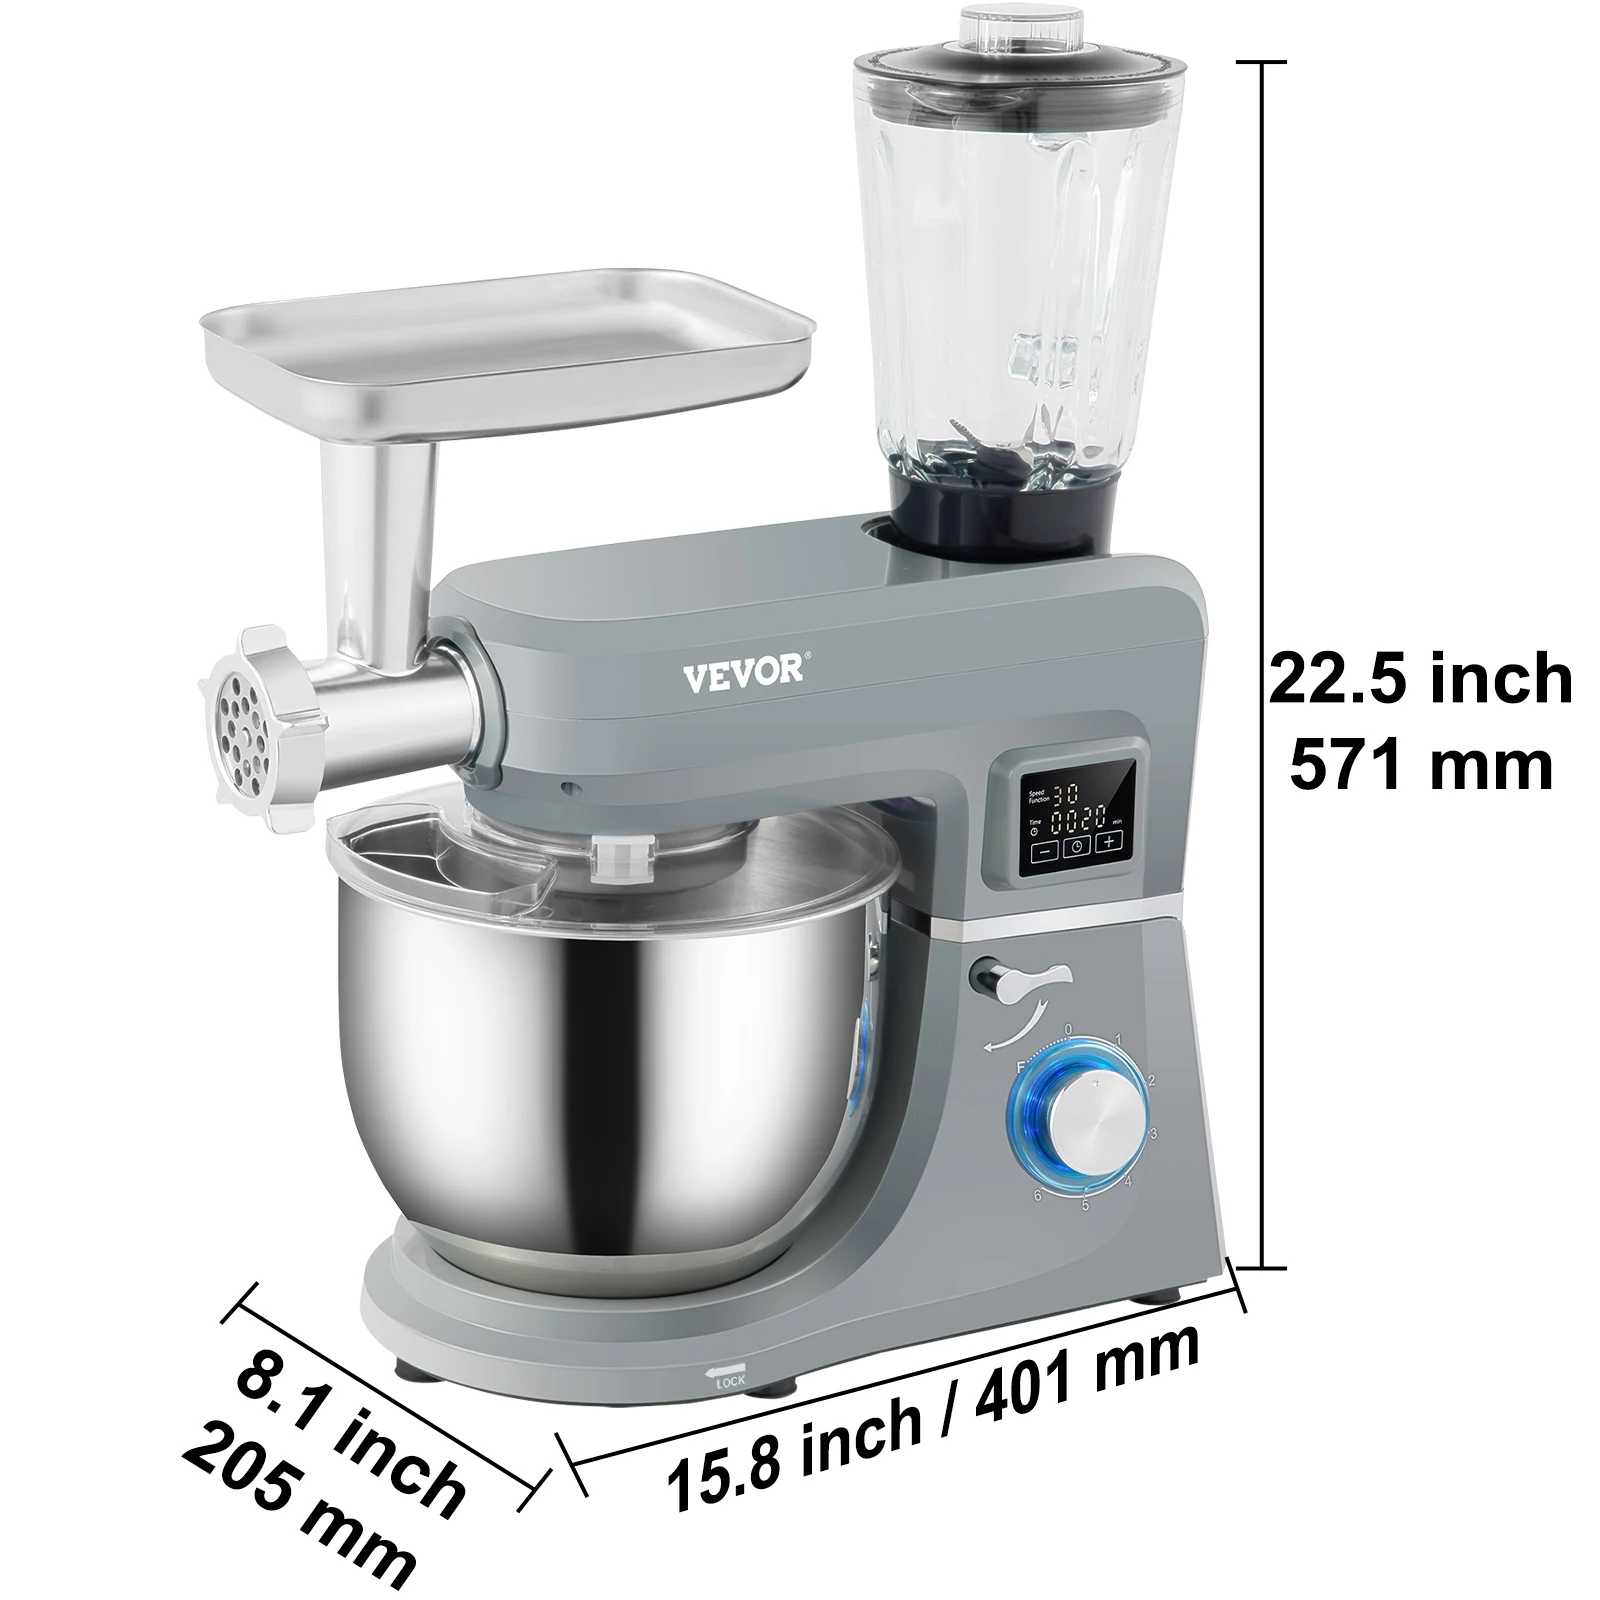 HOWORK Stand Mixer, 8 45 QT Bowl 660W Food Mixer Review, Easy to use 